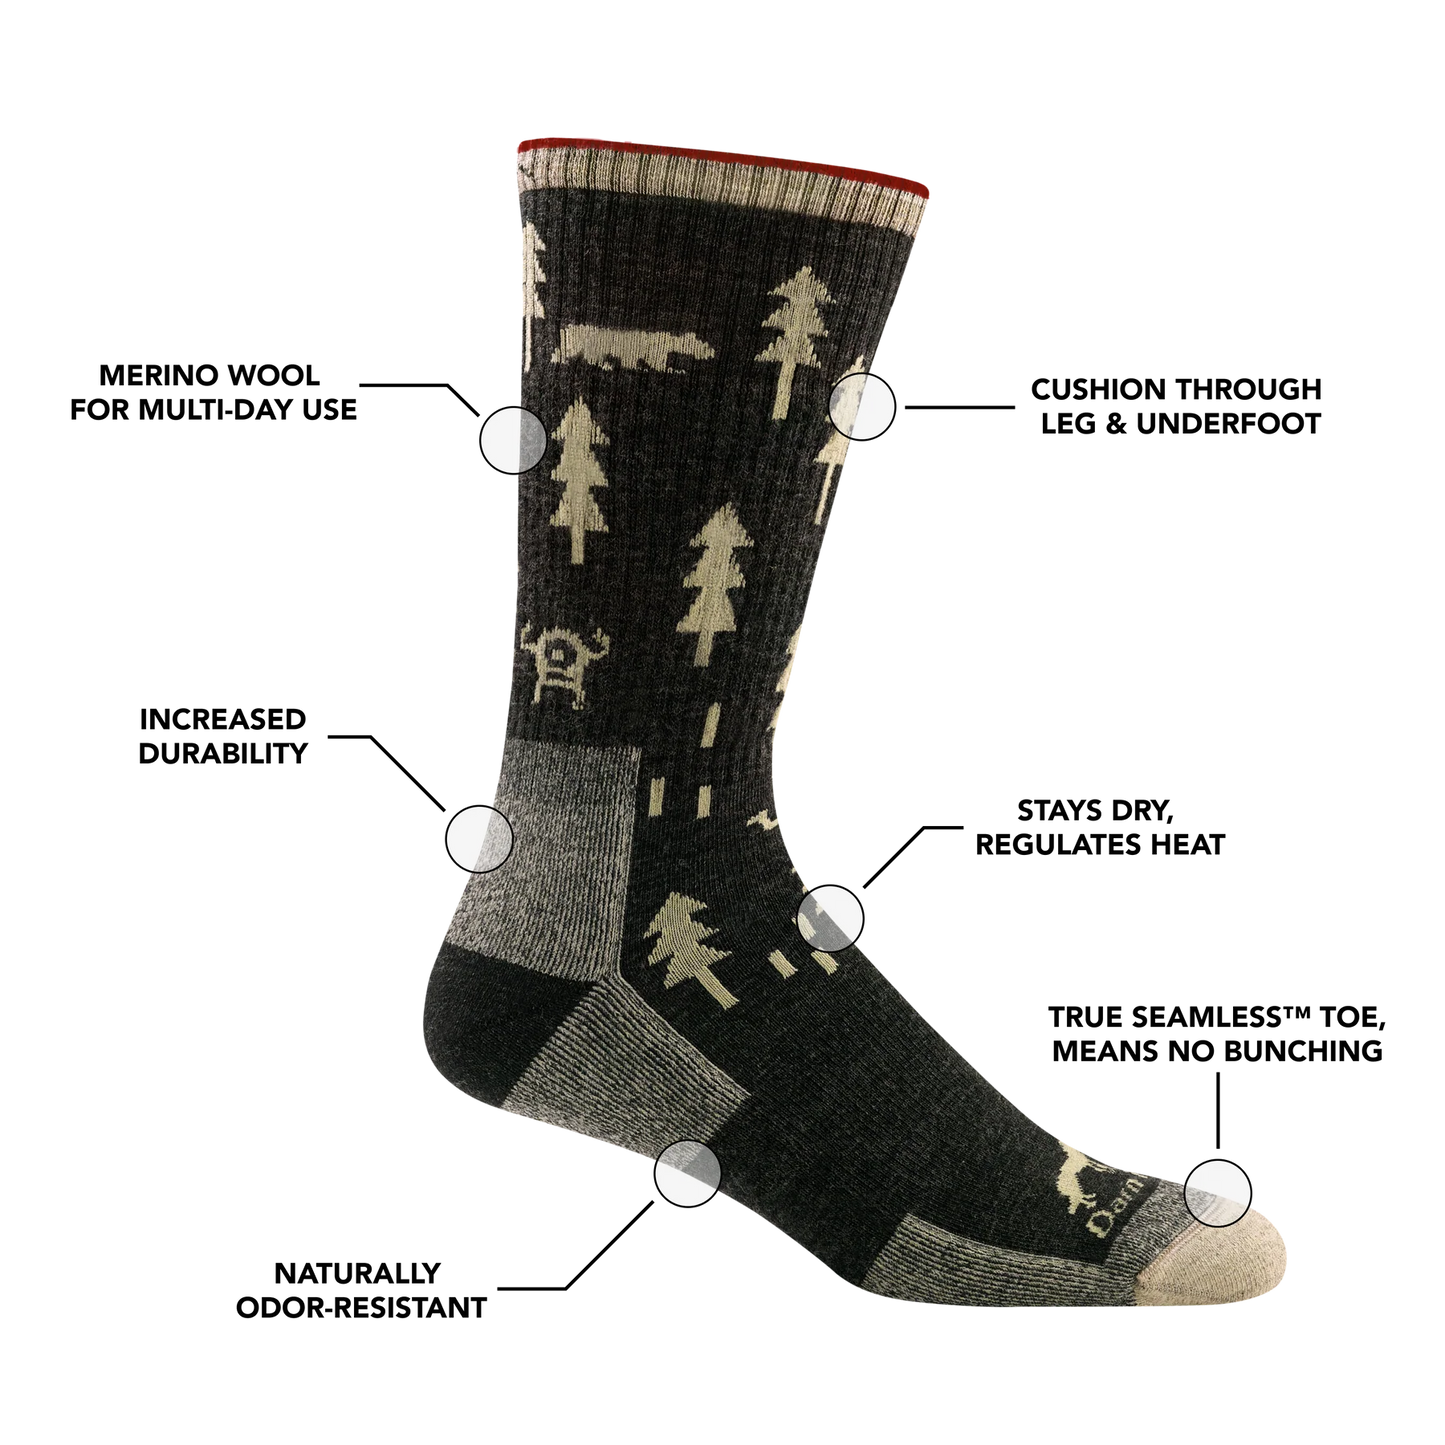 Darn tough olive green sock with cream forest geometric print plus labeled sock features 